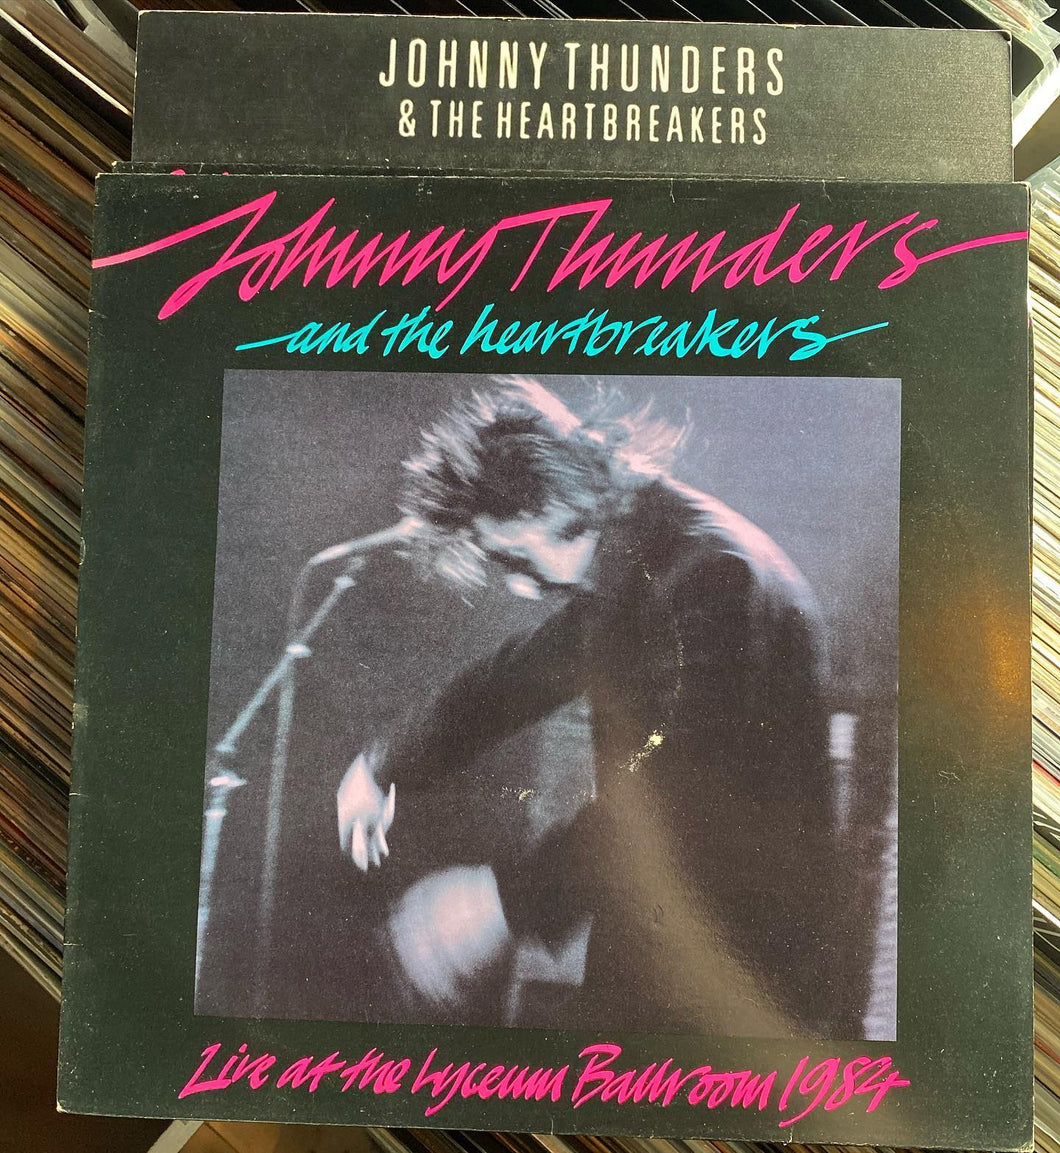 Johnny Thunders & the Heartbreakers - Live at the Lyceum Ballroom 1984